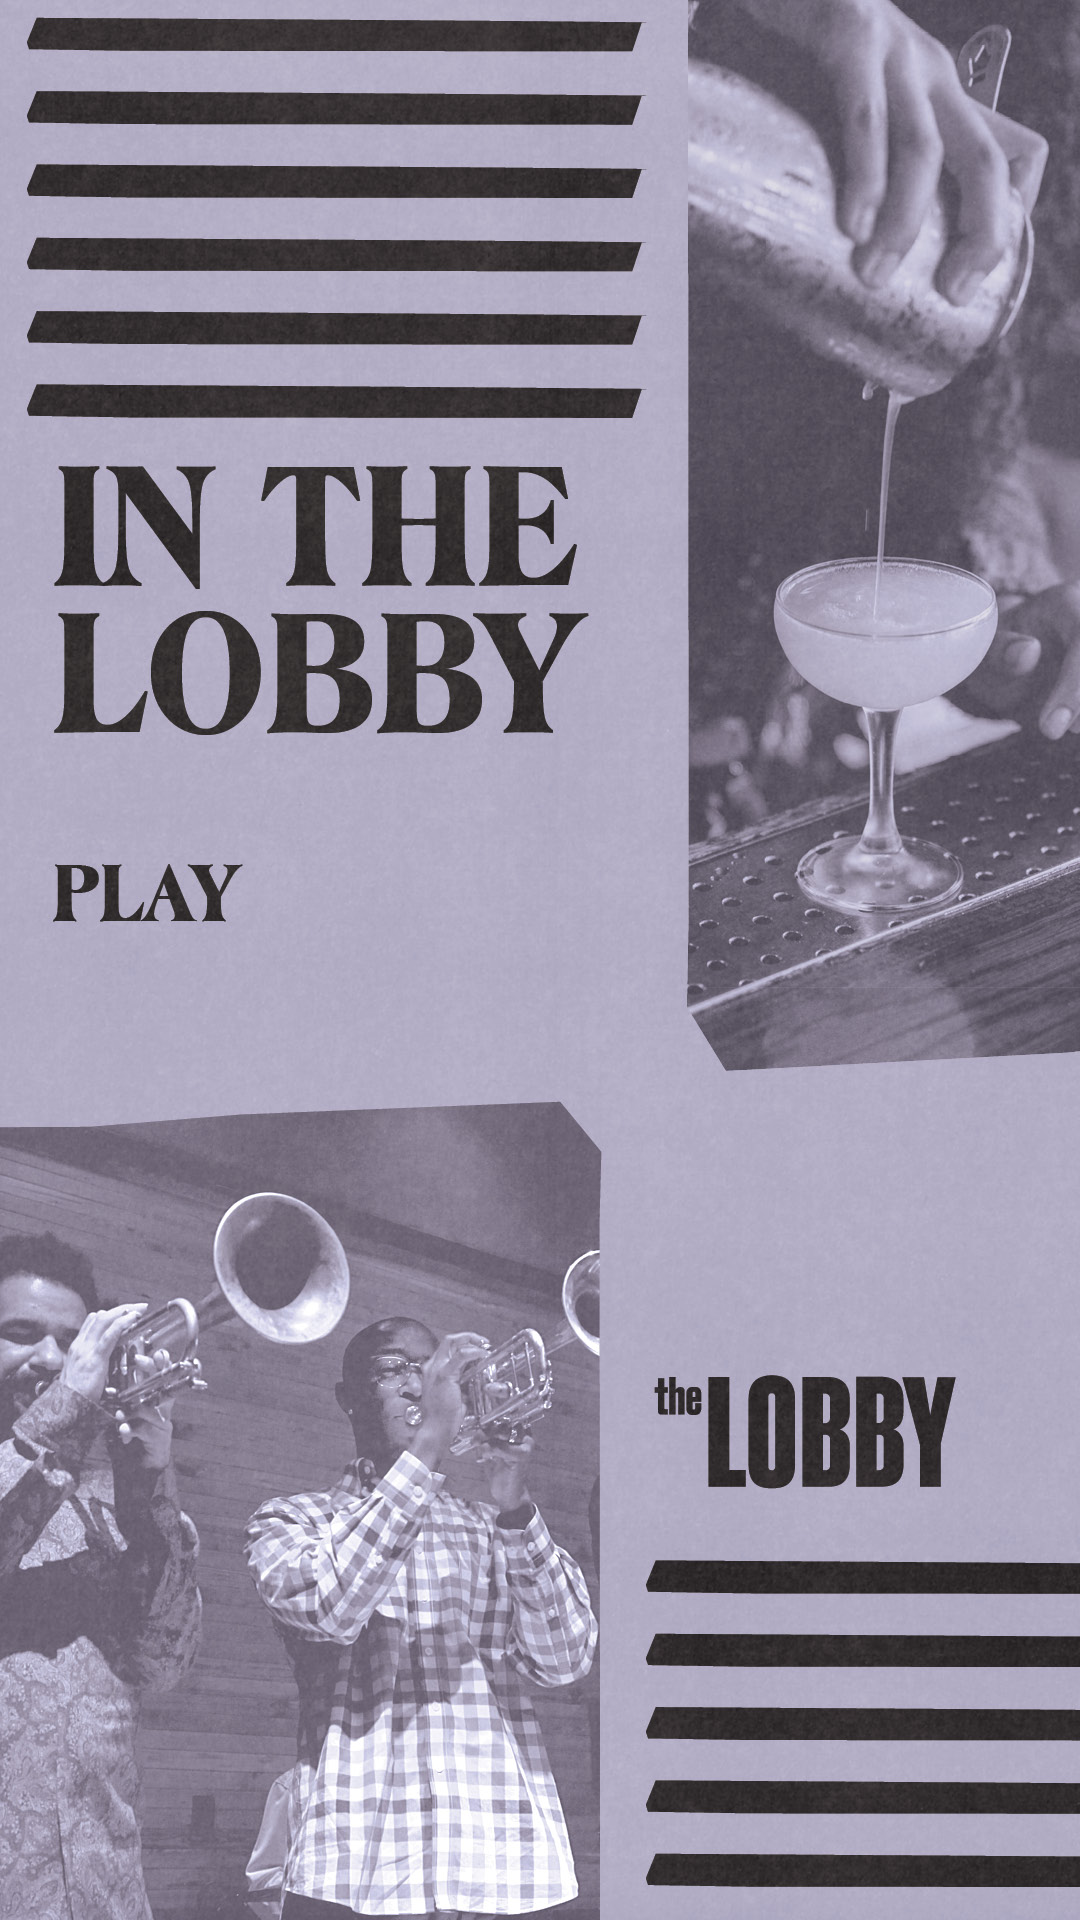 Lobby programming template - play in the lobby